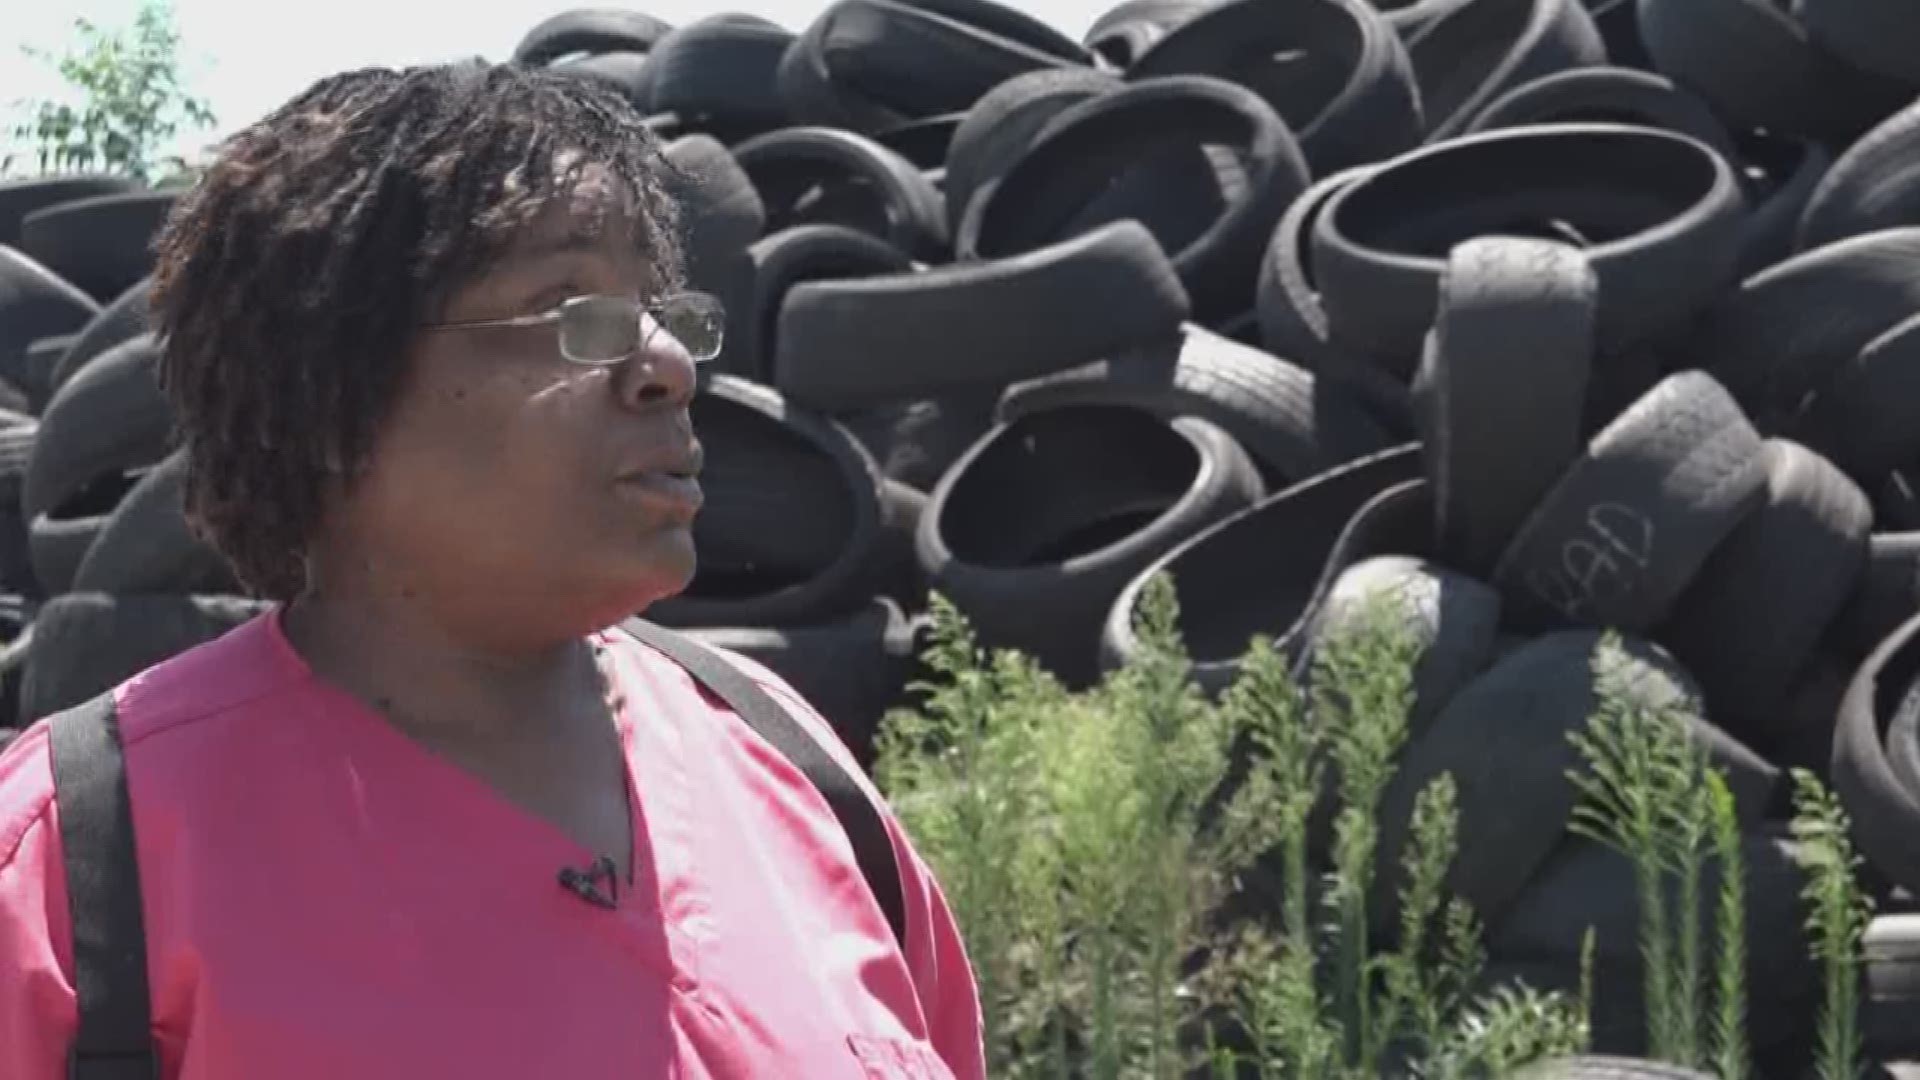 For four years now, people in Cotton Plant have been trying to get a dump-site cleaned up, but they tell THV11 that so far nothing has happened.